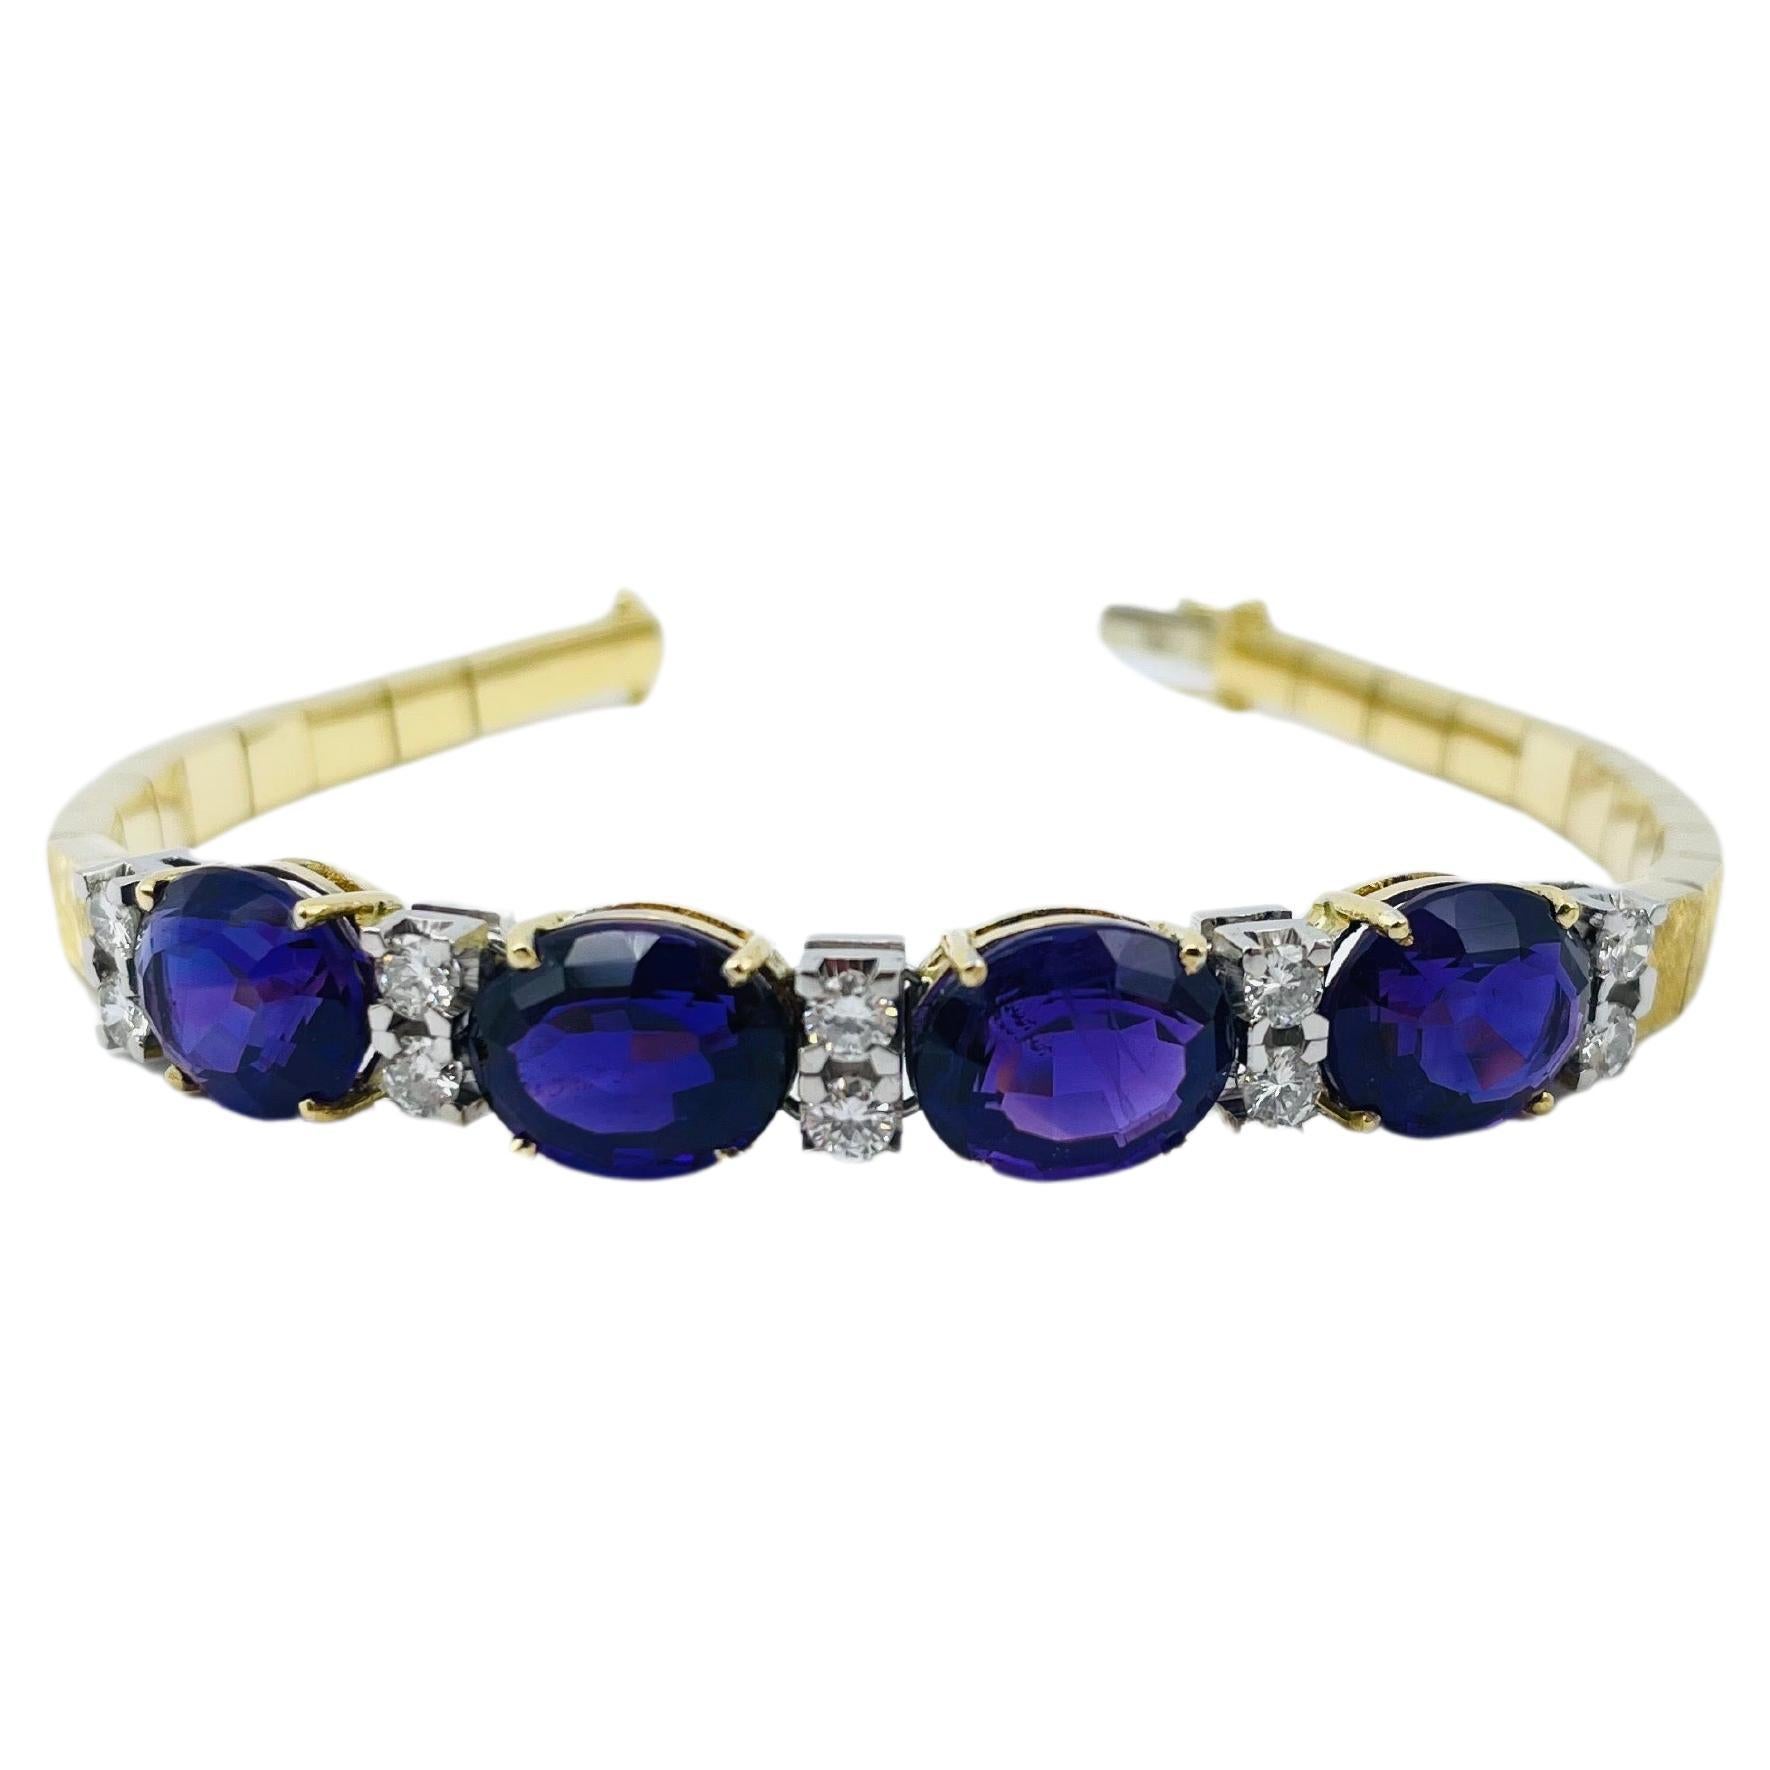 Noble Amethyst and Diamond Bracelet, 18k Yellow Gold and White Gold For Sale 6